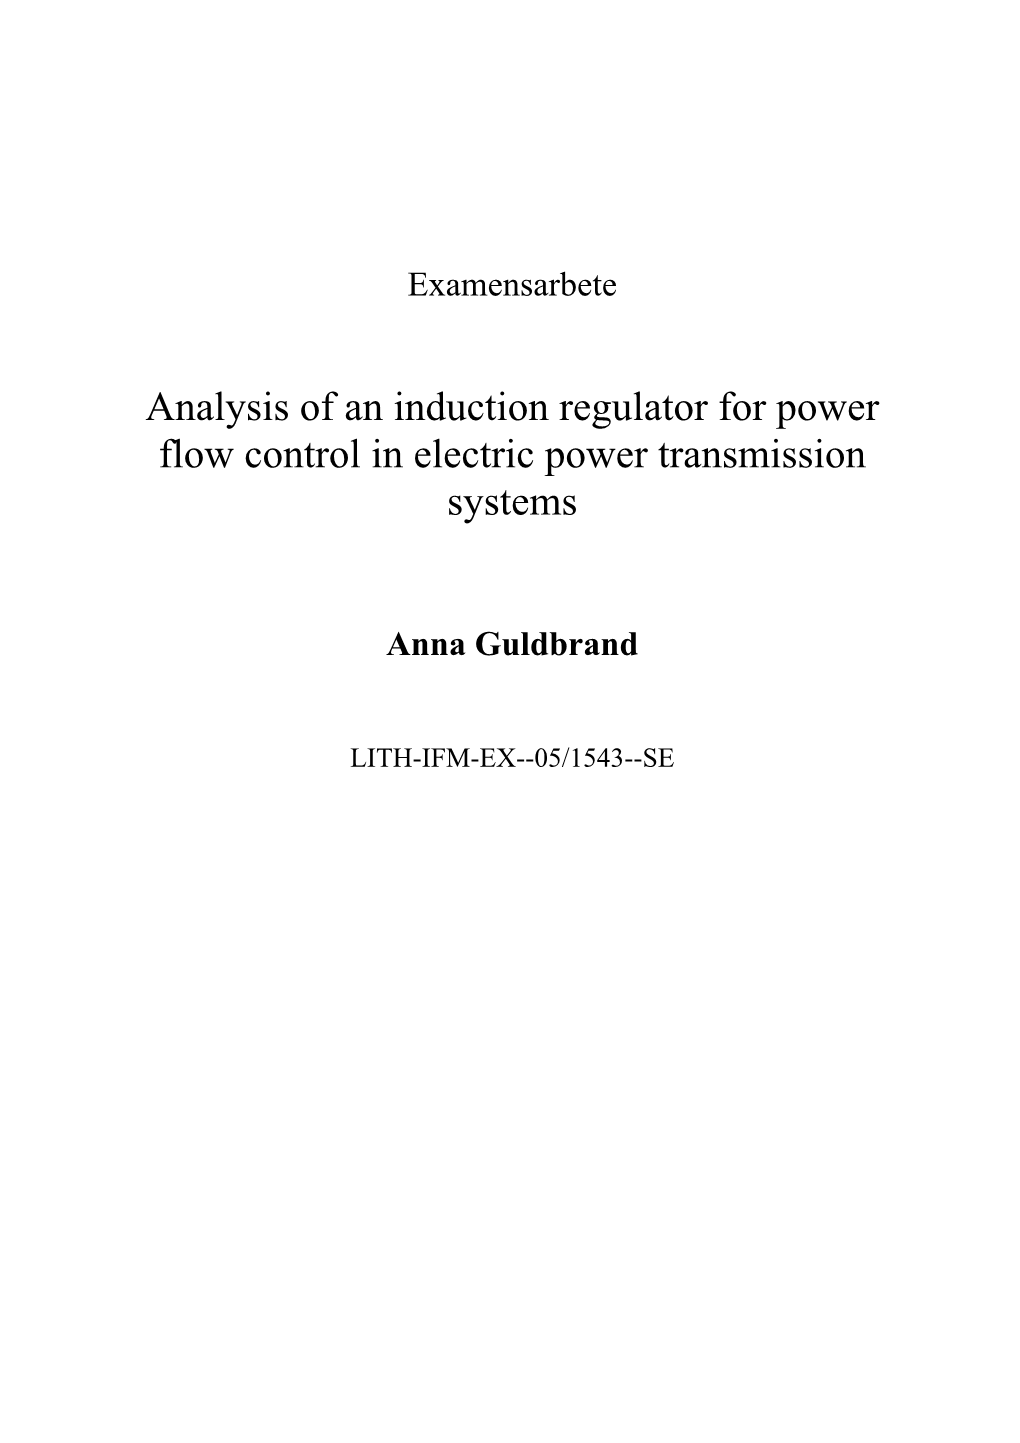 Analysis of an Induction Regulator for Power Flow Control in Electric Power Transmission Systems